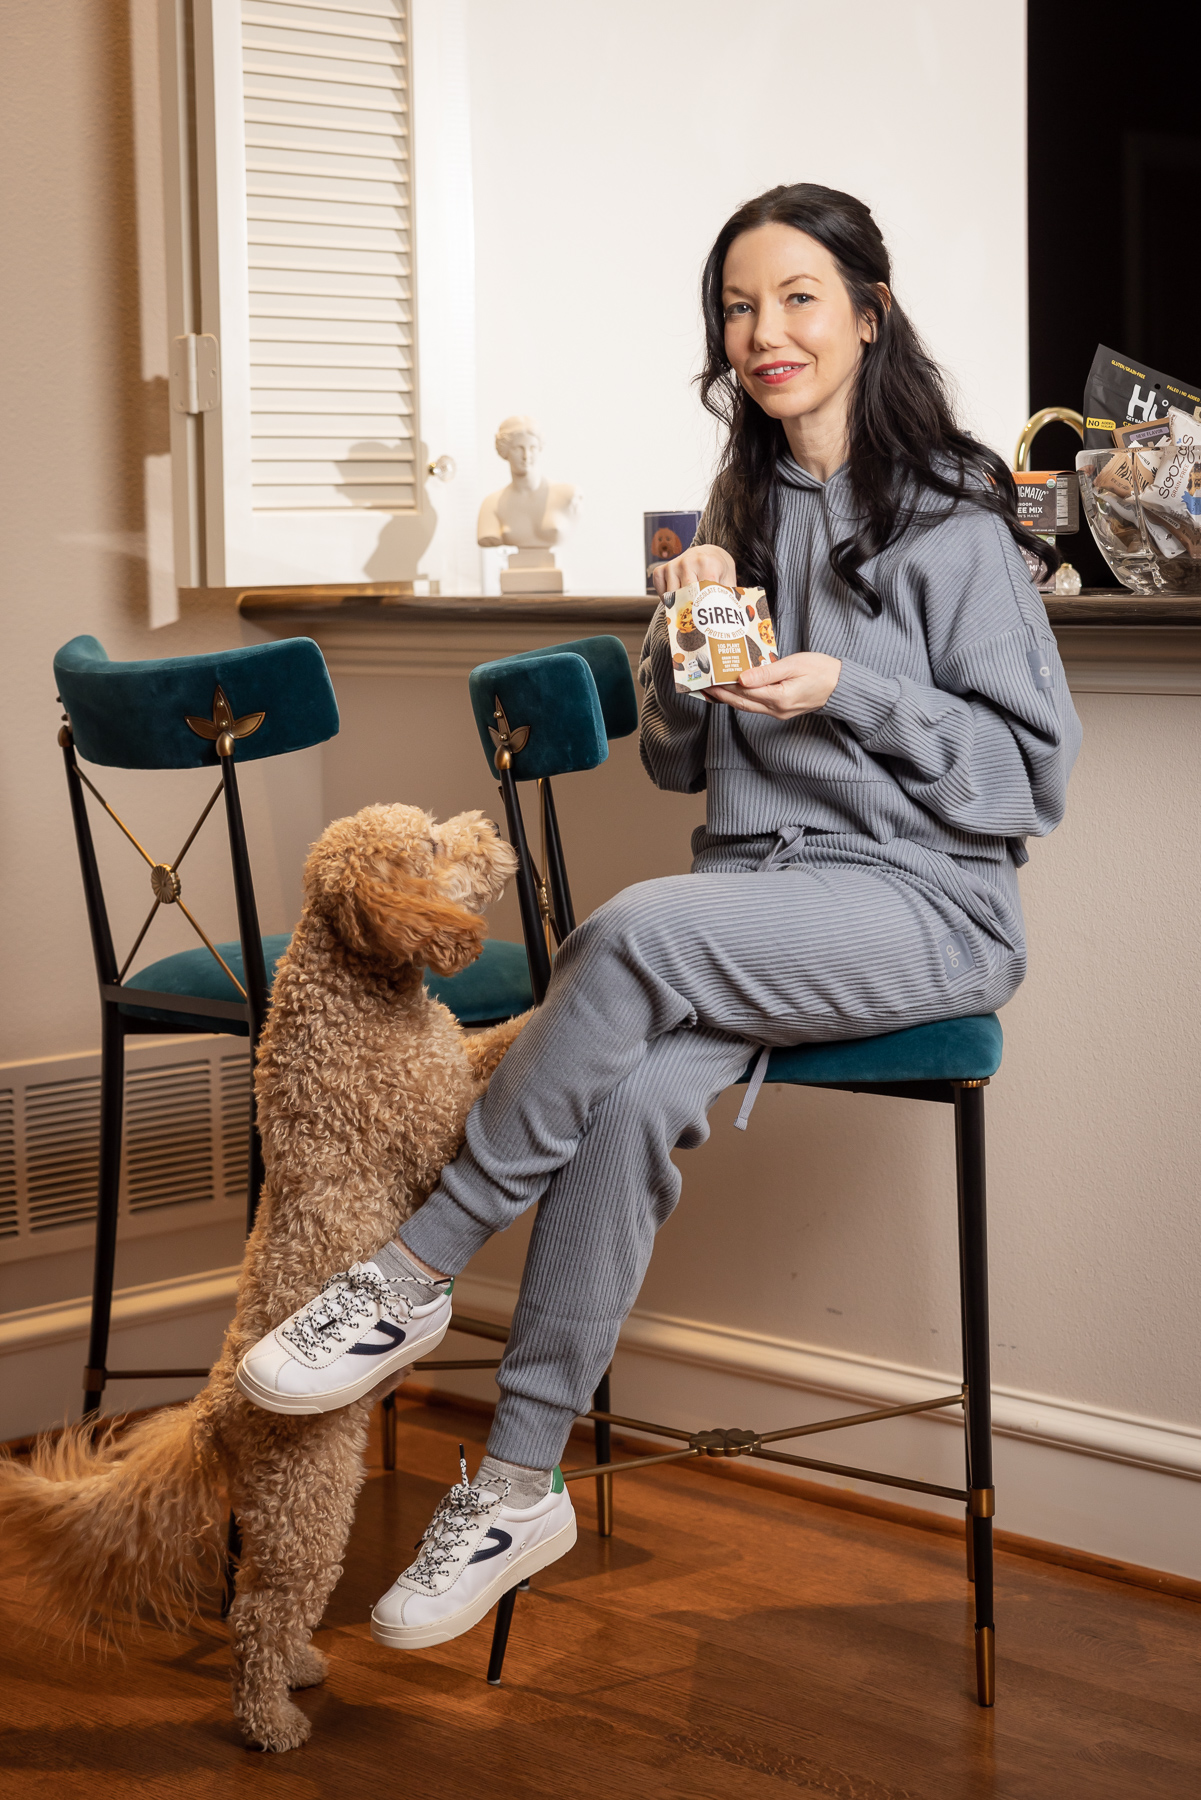 Dallas Home Interior, Alo Yoga Muse Hoodie and Sweatpant Set, Adaptogens, Healthy Snacks, Home Update, Mini Goldendoodle Puppy, Jonathan Adler Rider Counter Stools, Home Bar, Siren Protein Bites